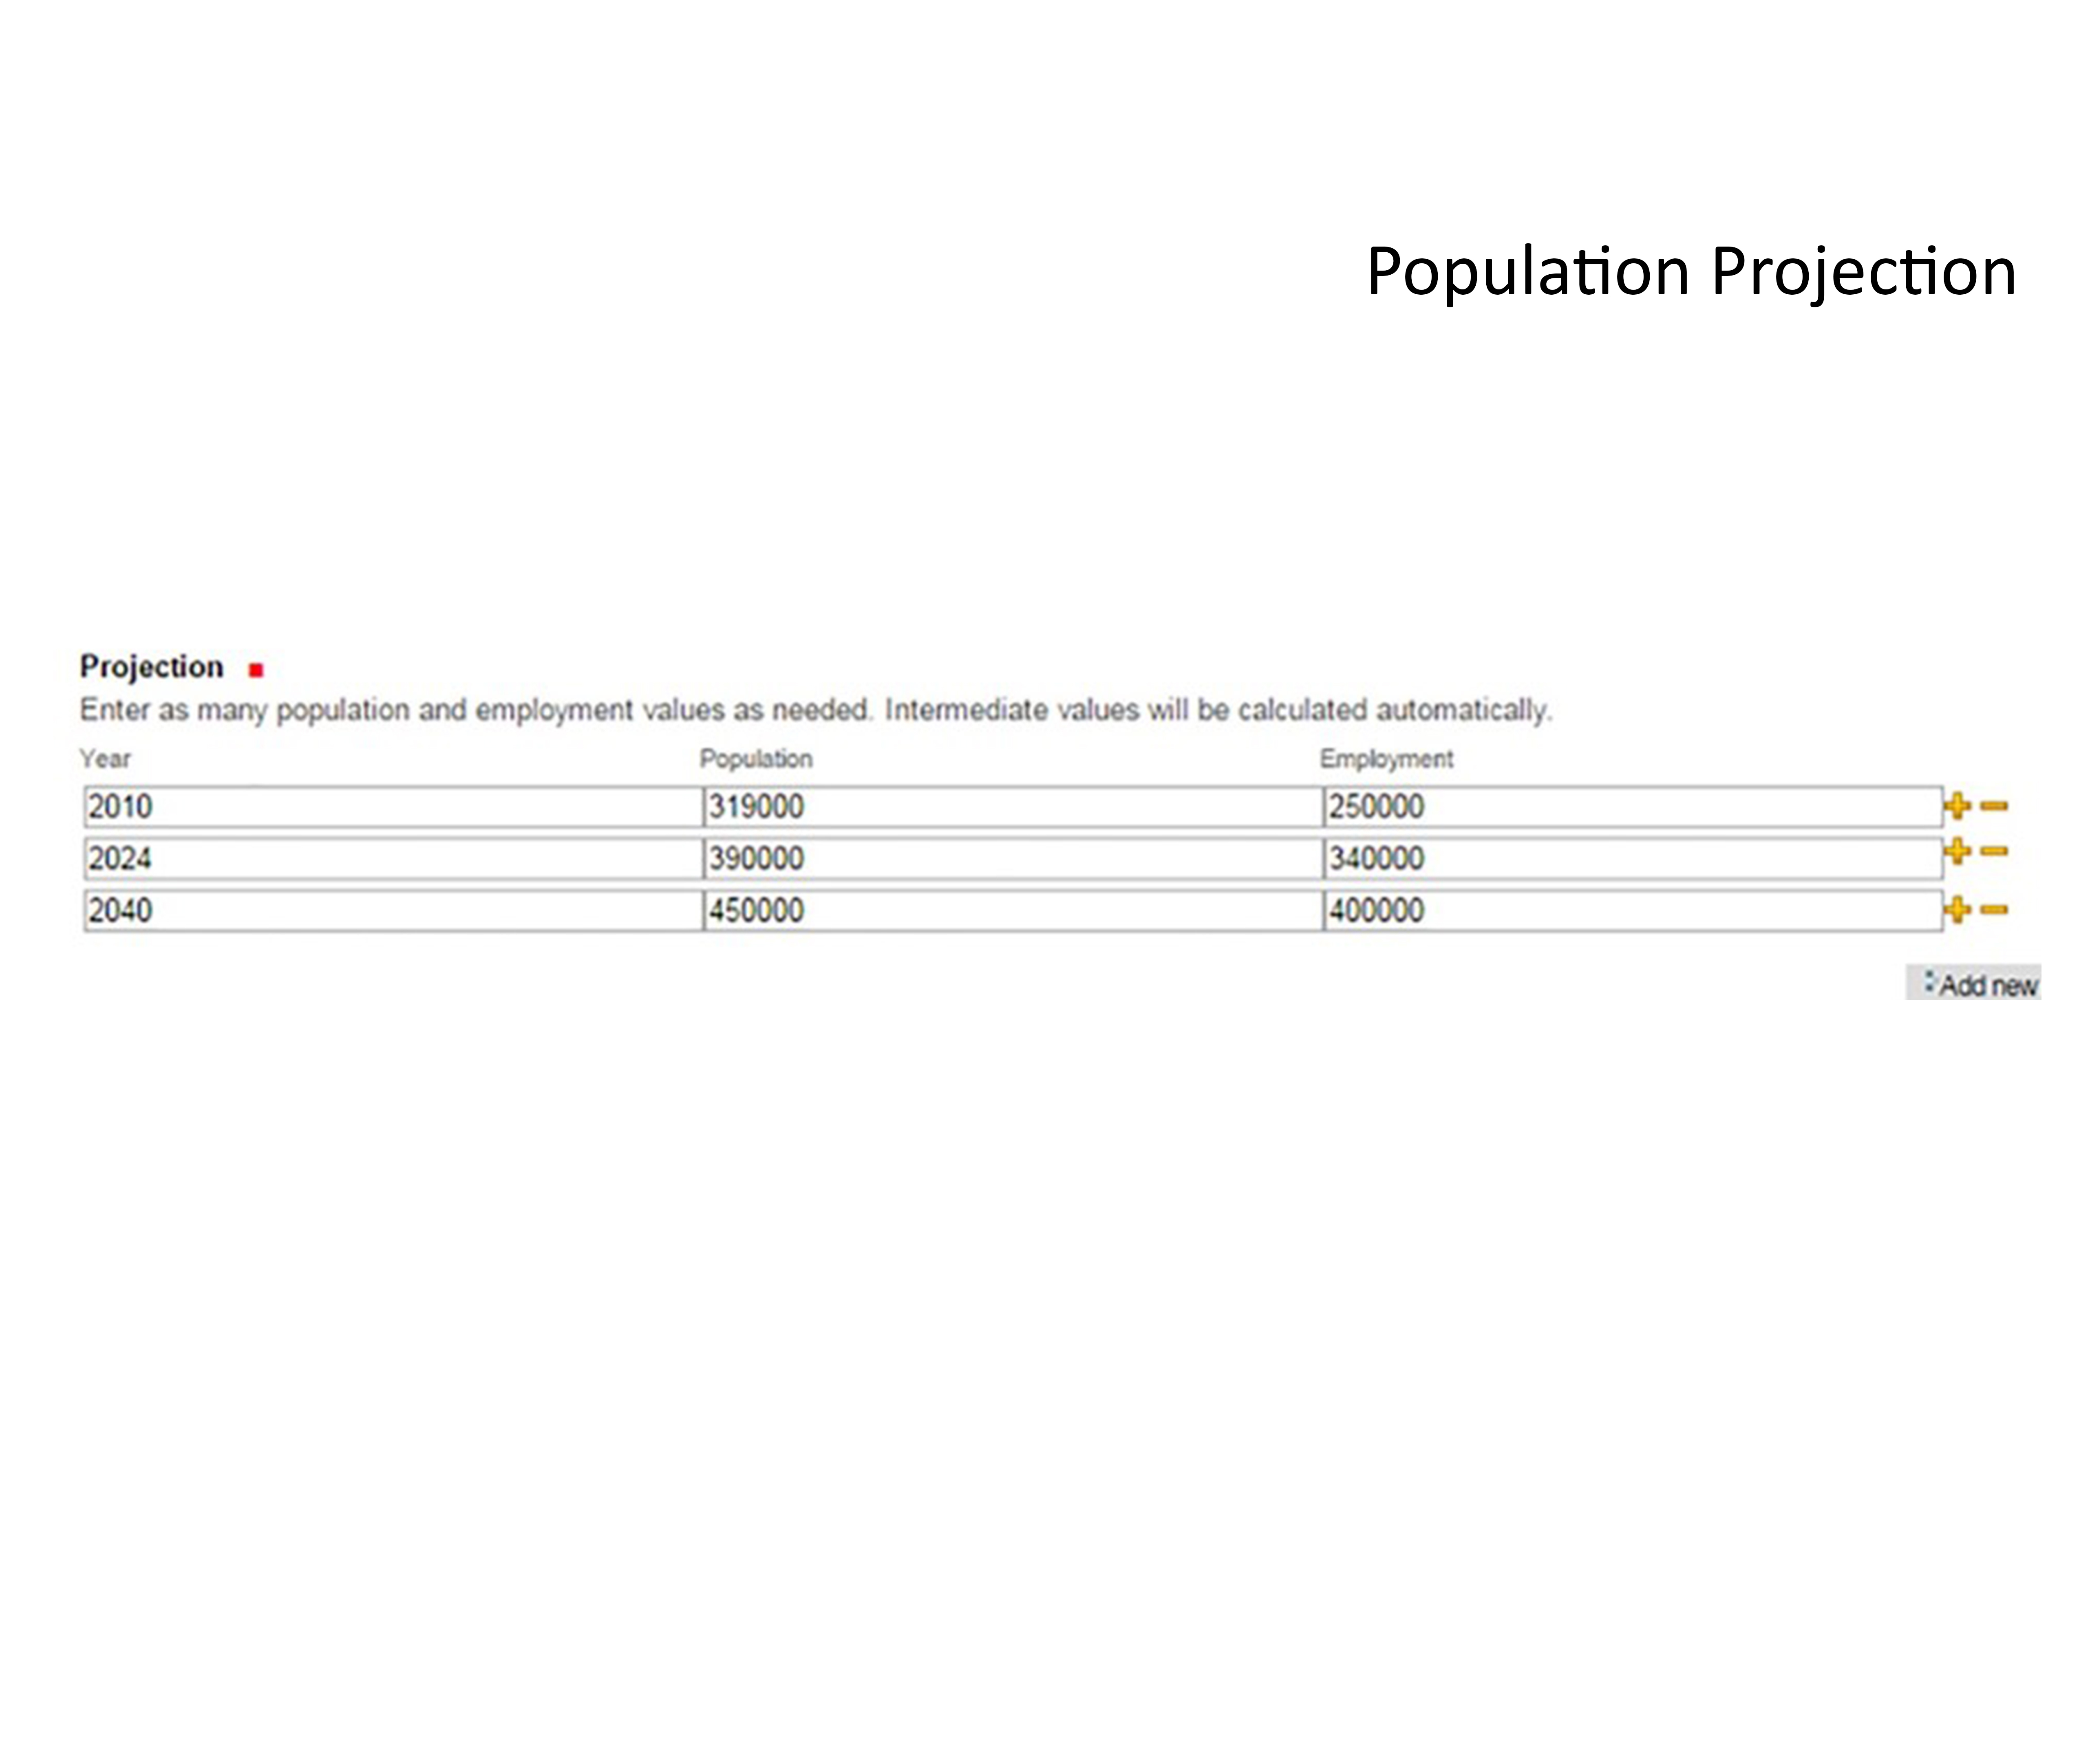 Population Projection